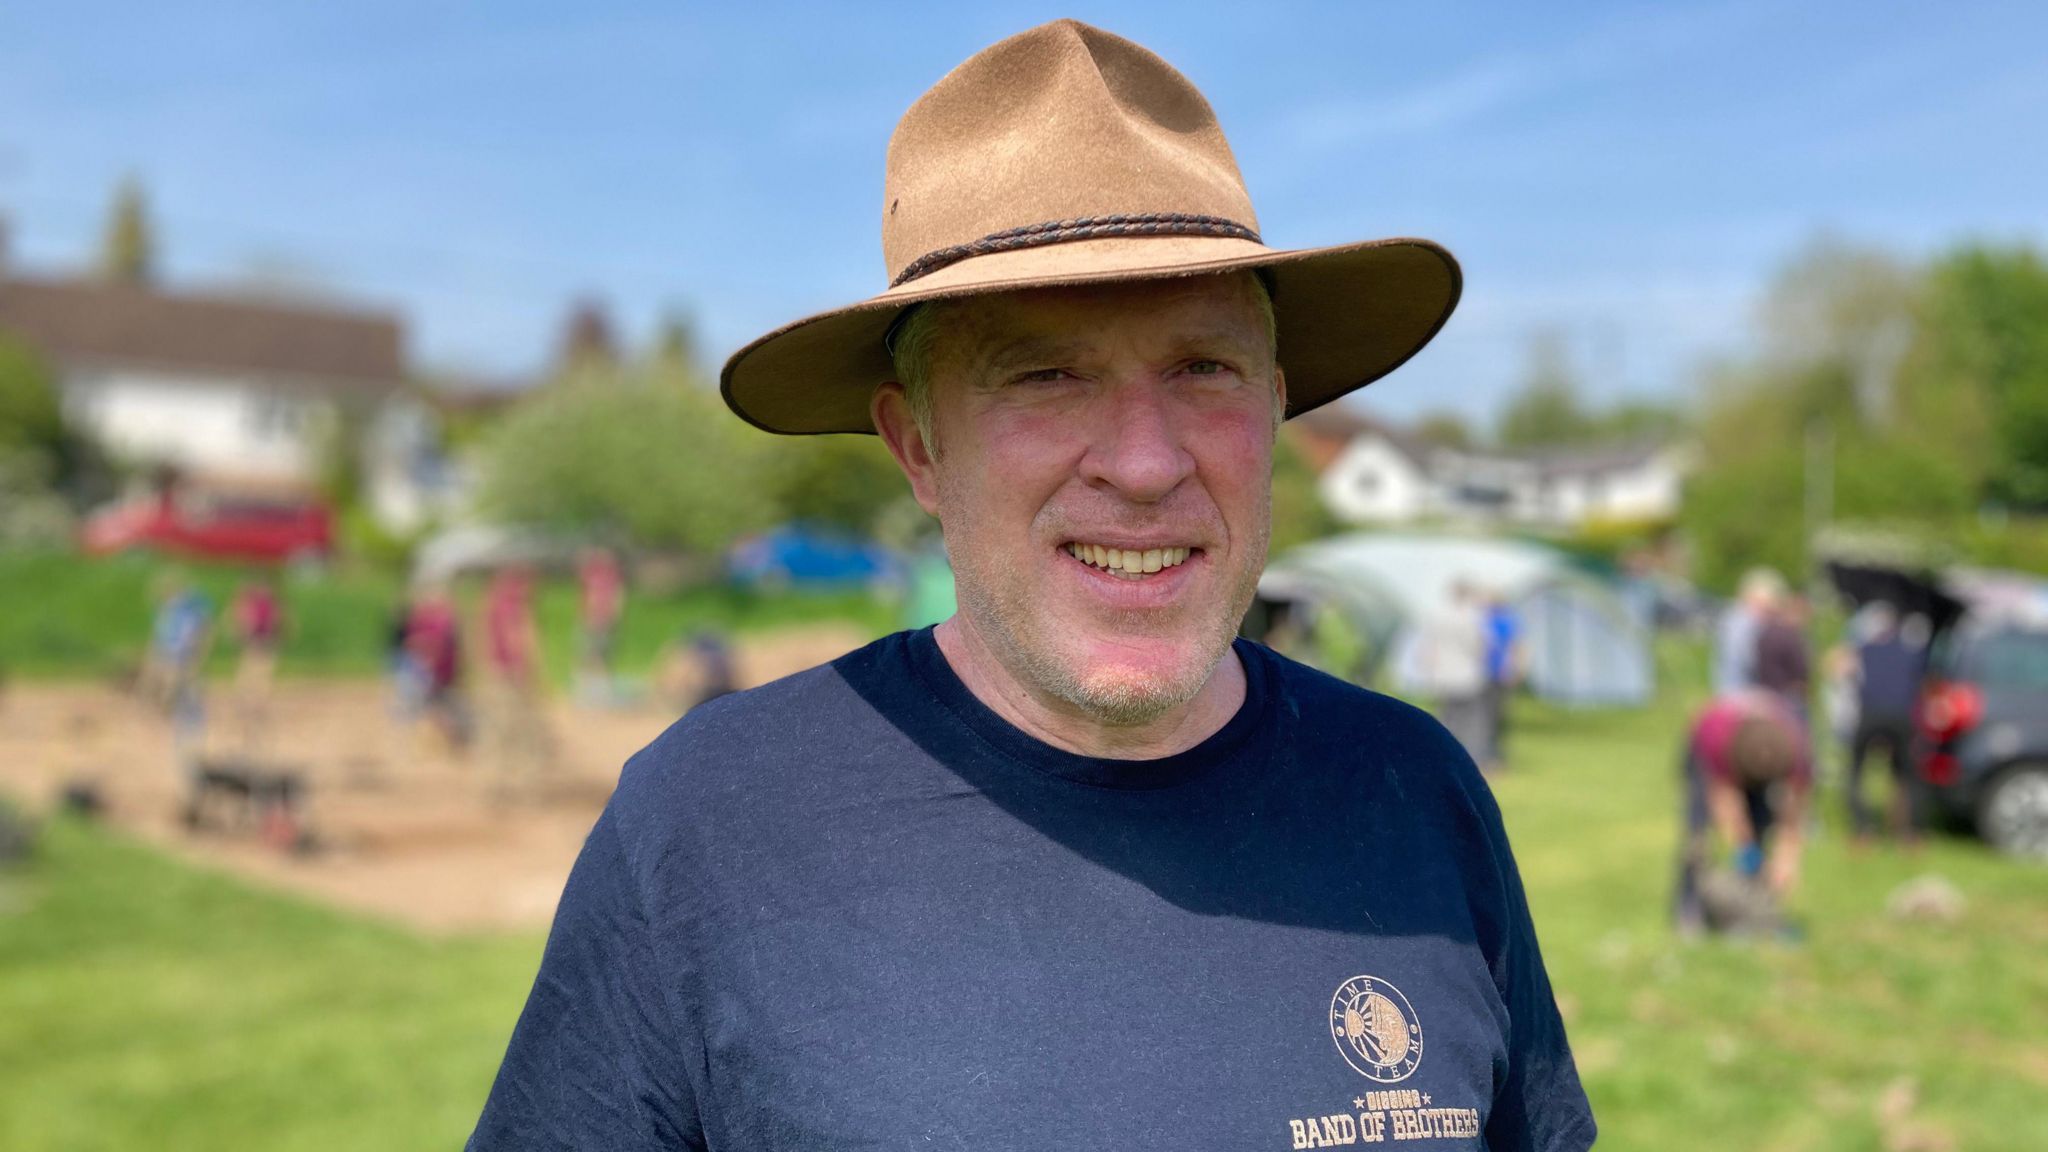 Richard Osgood wears a blue t-shirt and brimmed hat, looking at the camera